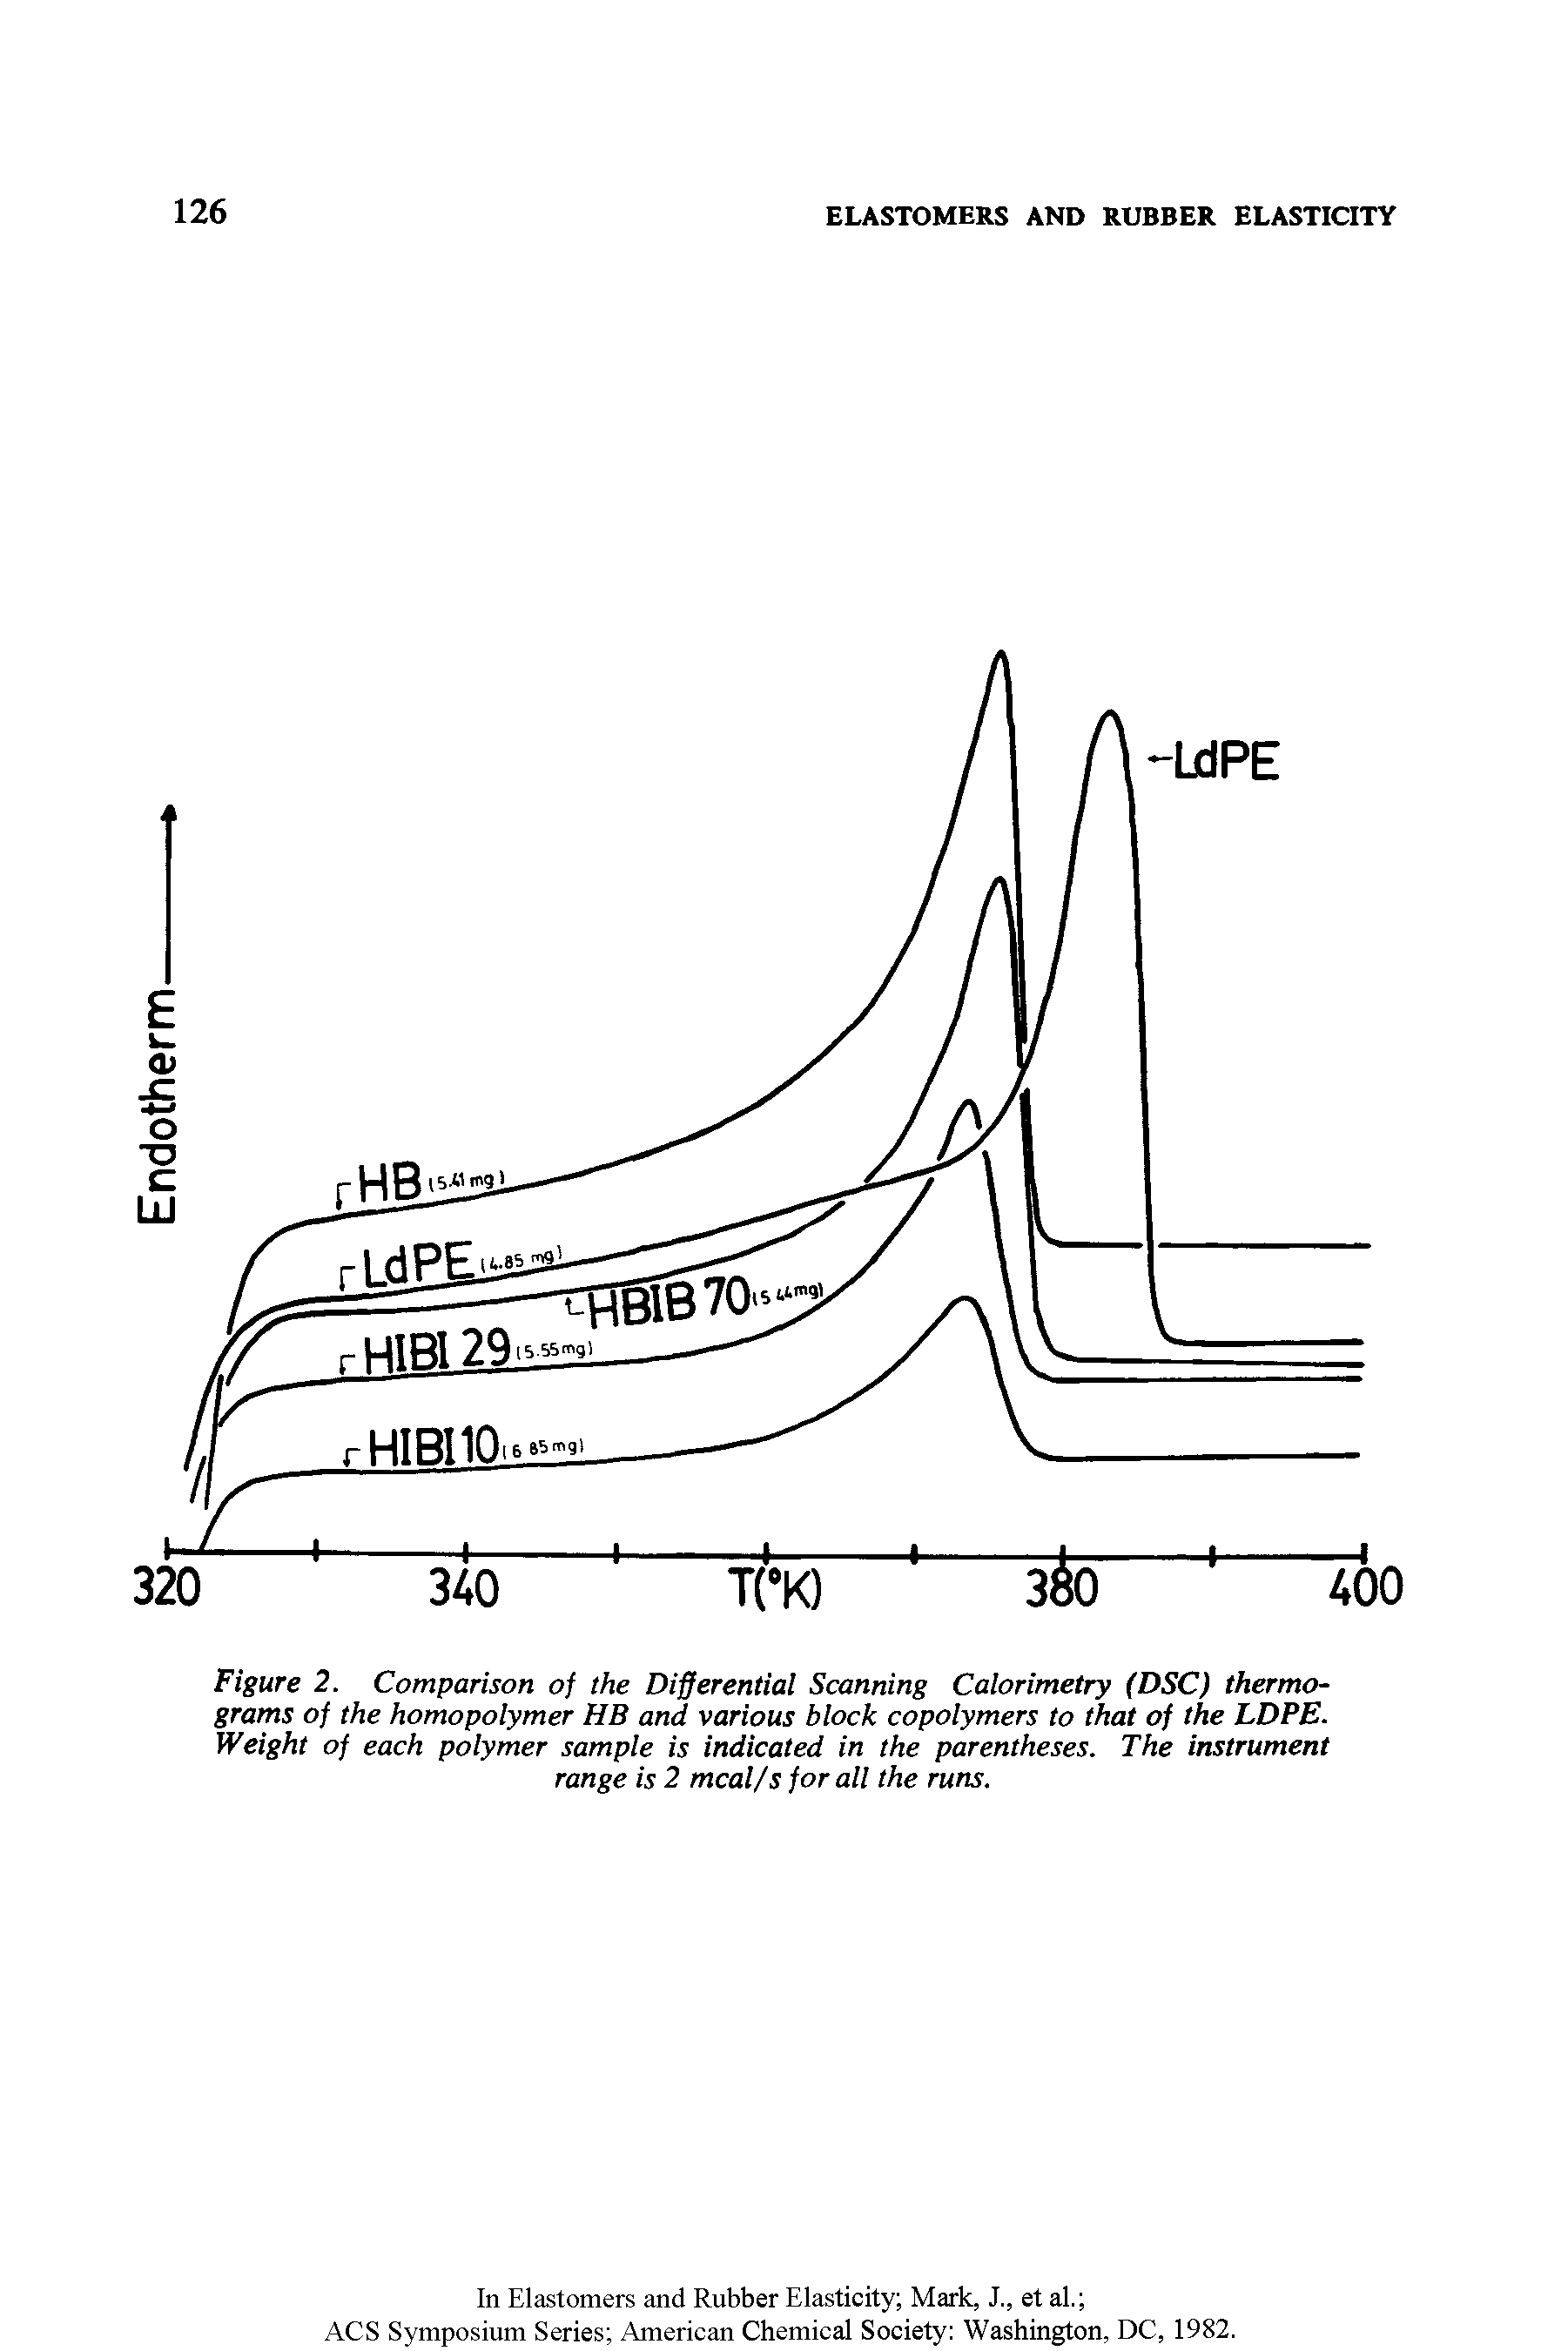 Figure 2. Comparison of the Differential Scanning Calorimetry (DSC) thermograms of the homopolymer HB and various block copolymers to that of the LDPE. Weight of each polymer sample is indicated in the parentheses. The instrument range is 2 mcal/s for all the runs.